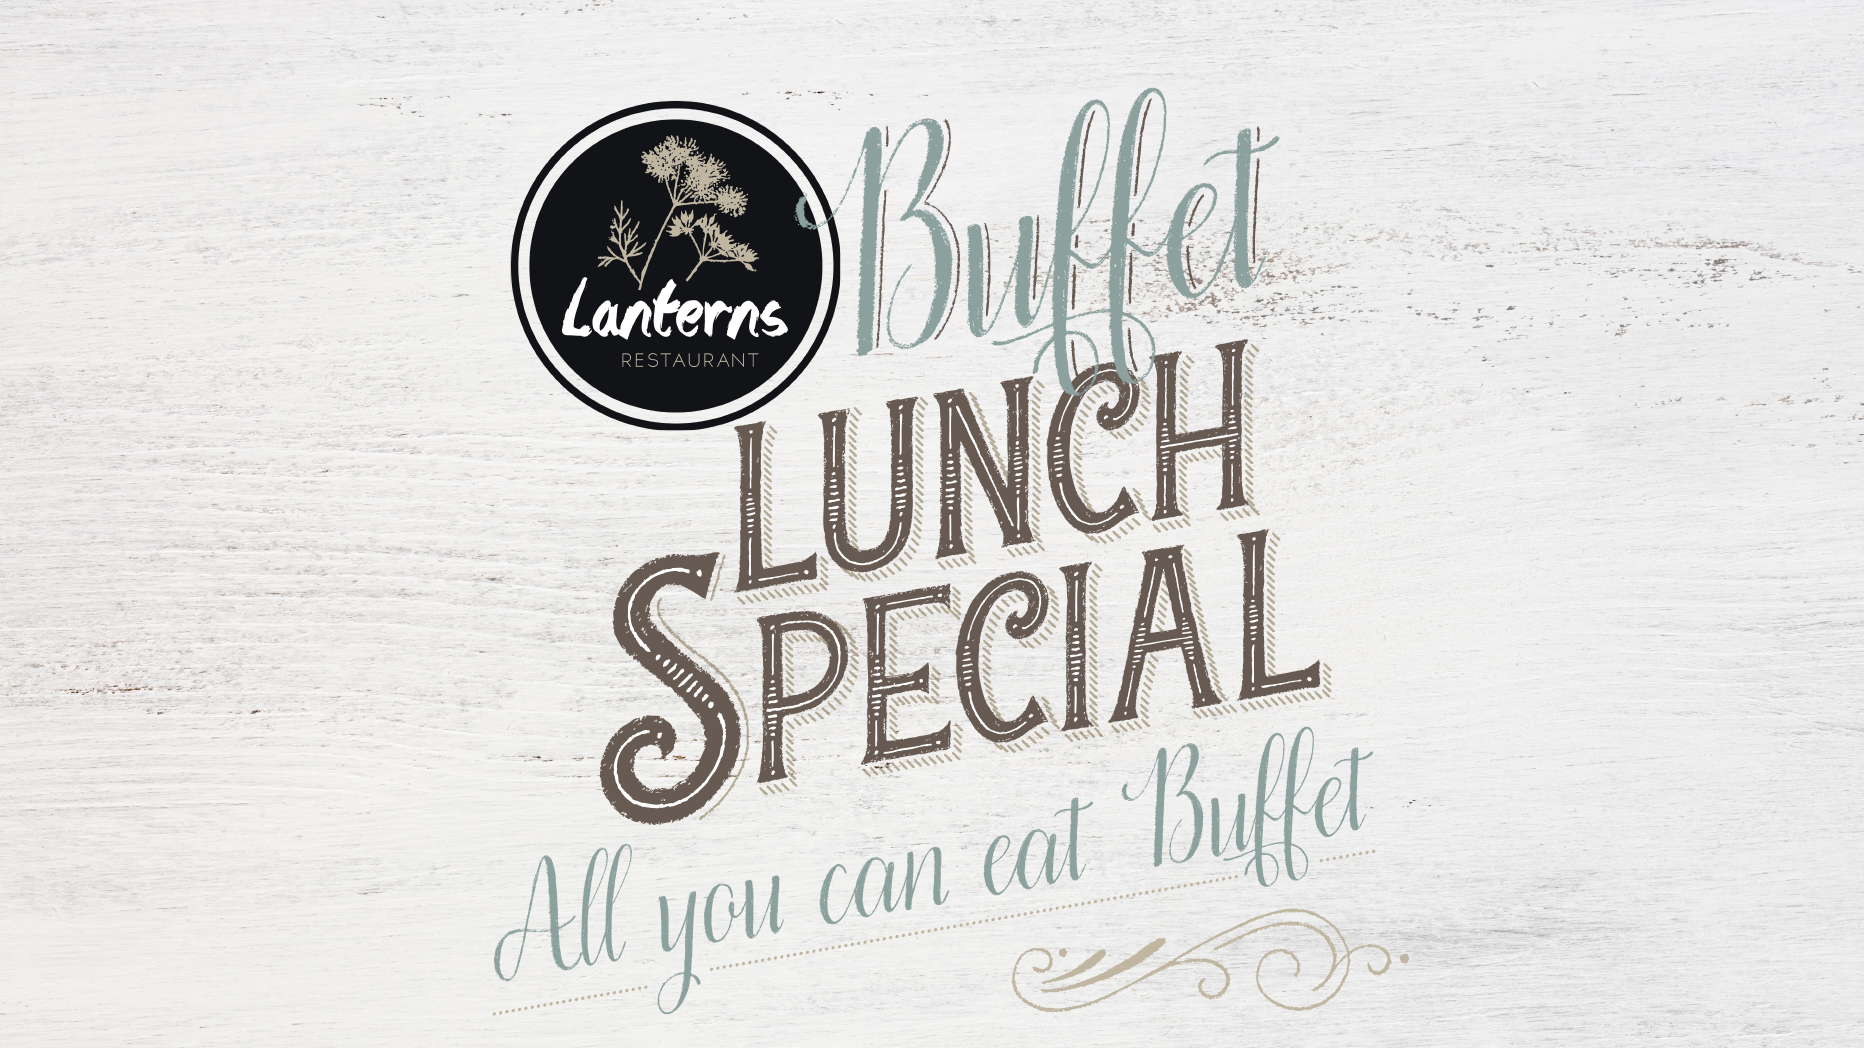 Lanterns Lunch Special at Brothers Leagues Club Cairns